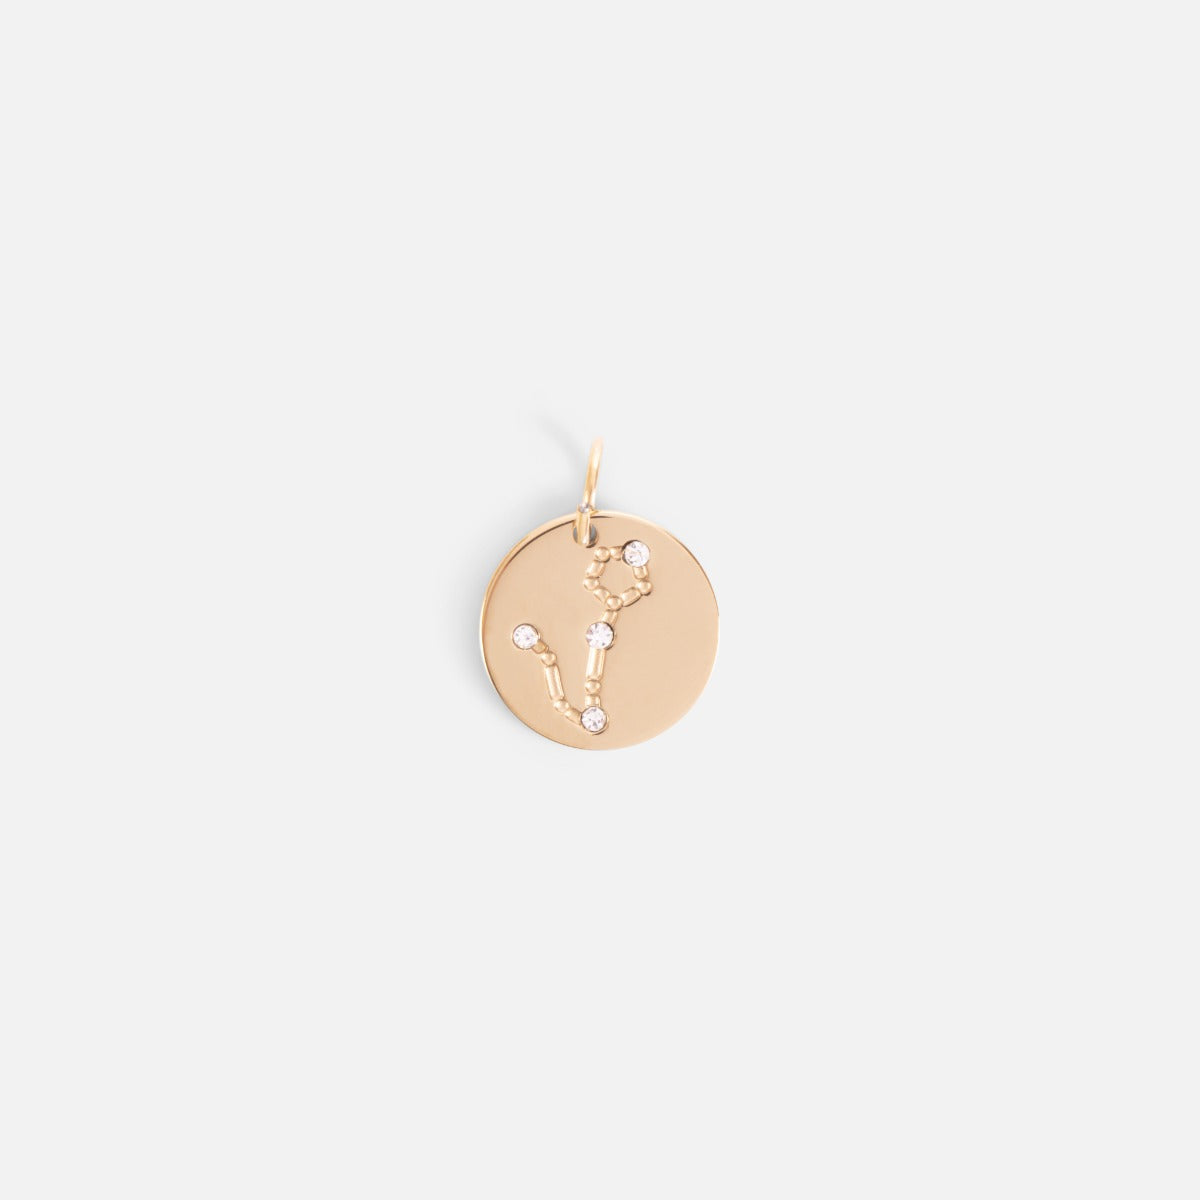 Small golden charm engraved with the zodiac constellation "pisces"